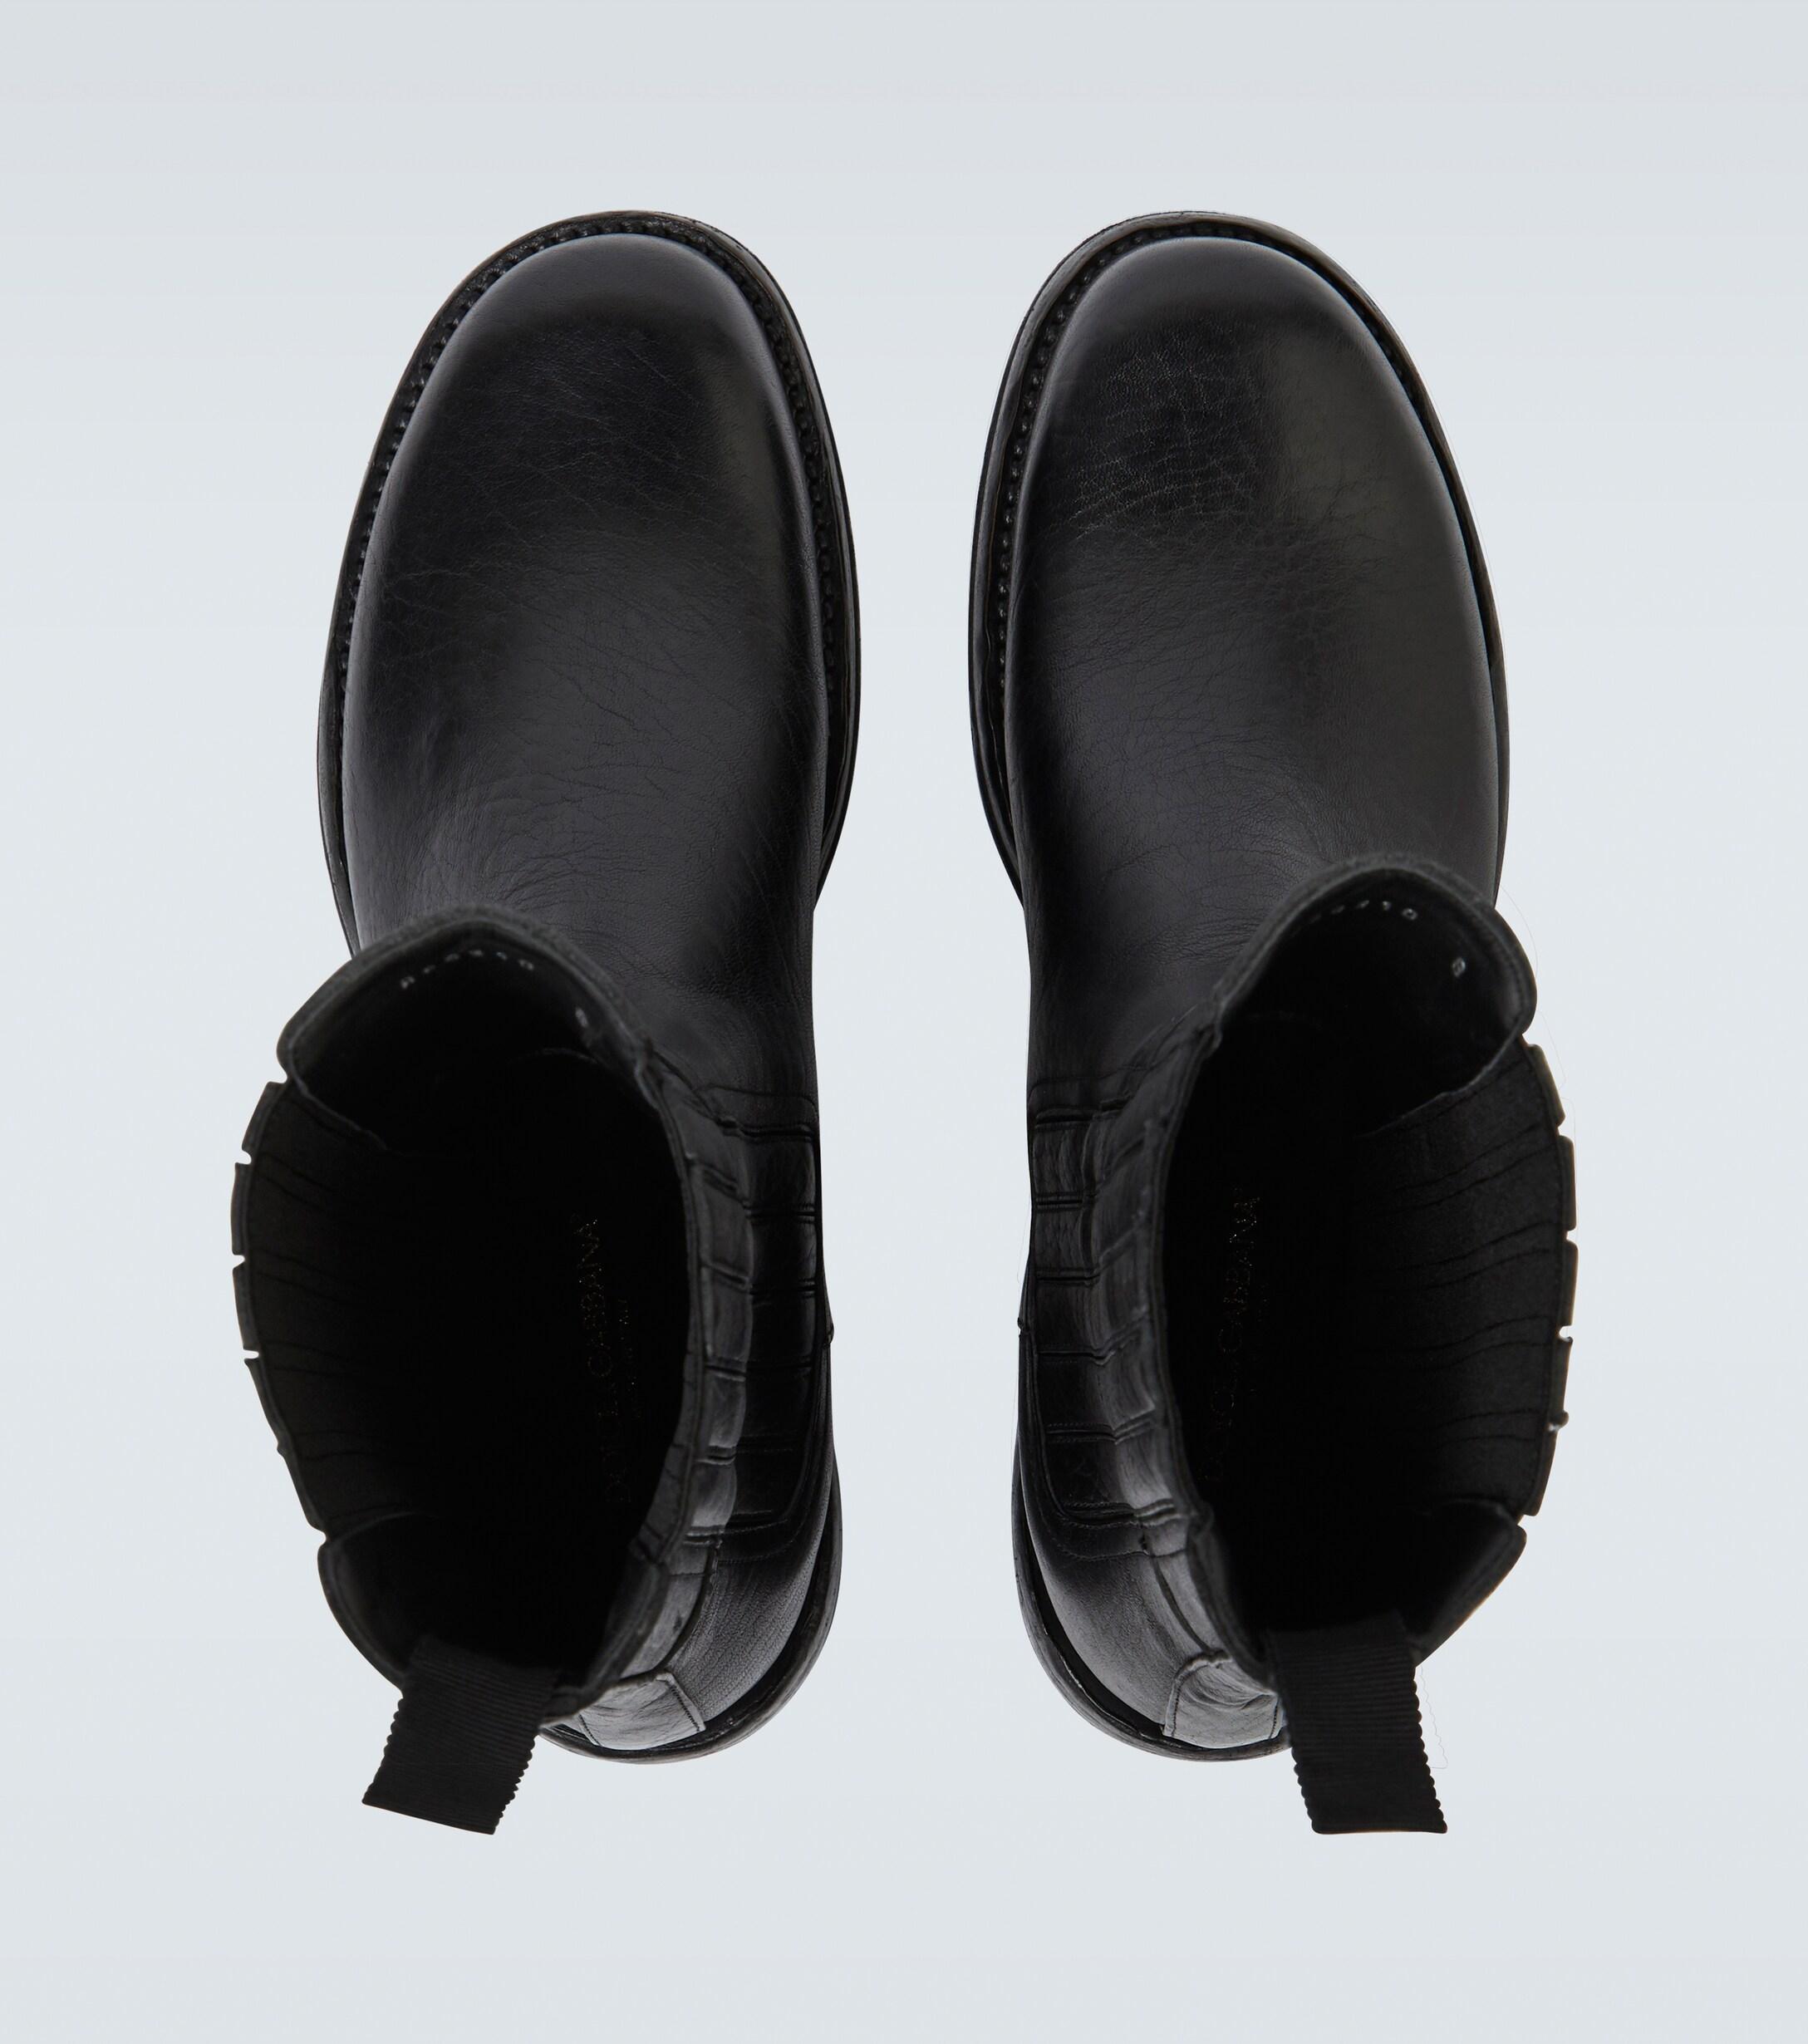 Dolce & Gabbana Leather Ankle Boots in Black for Men - Lyst